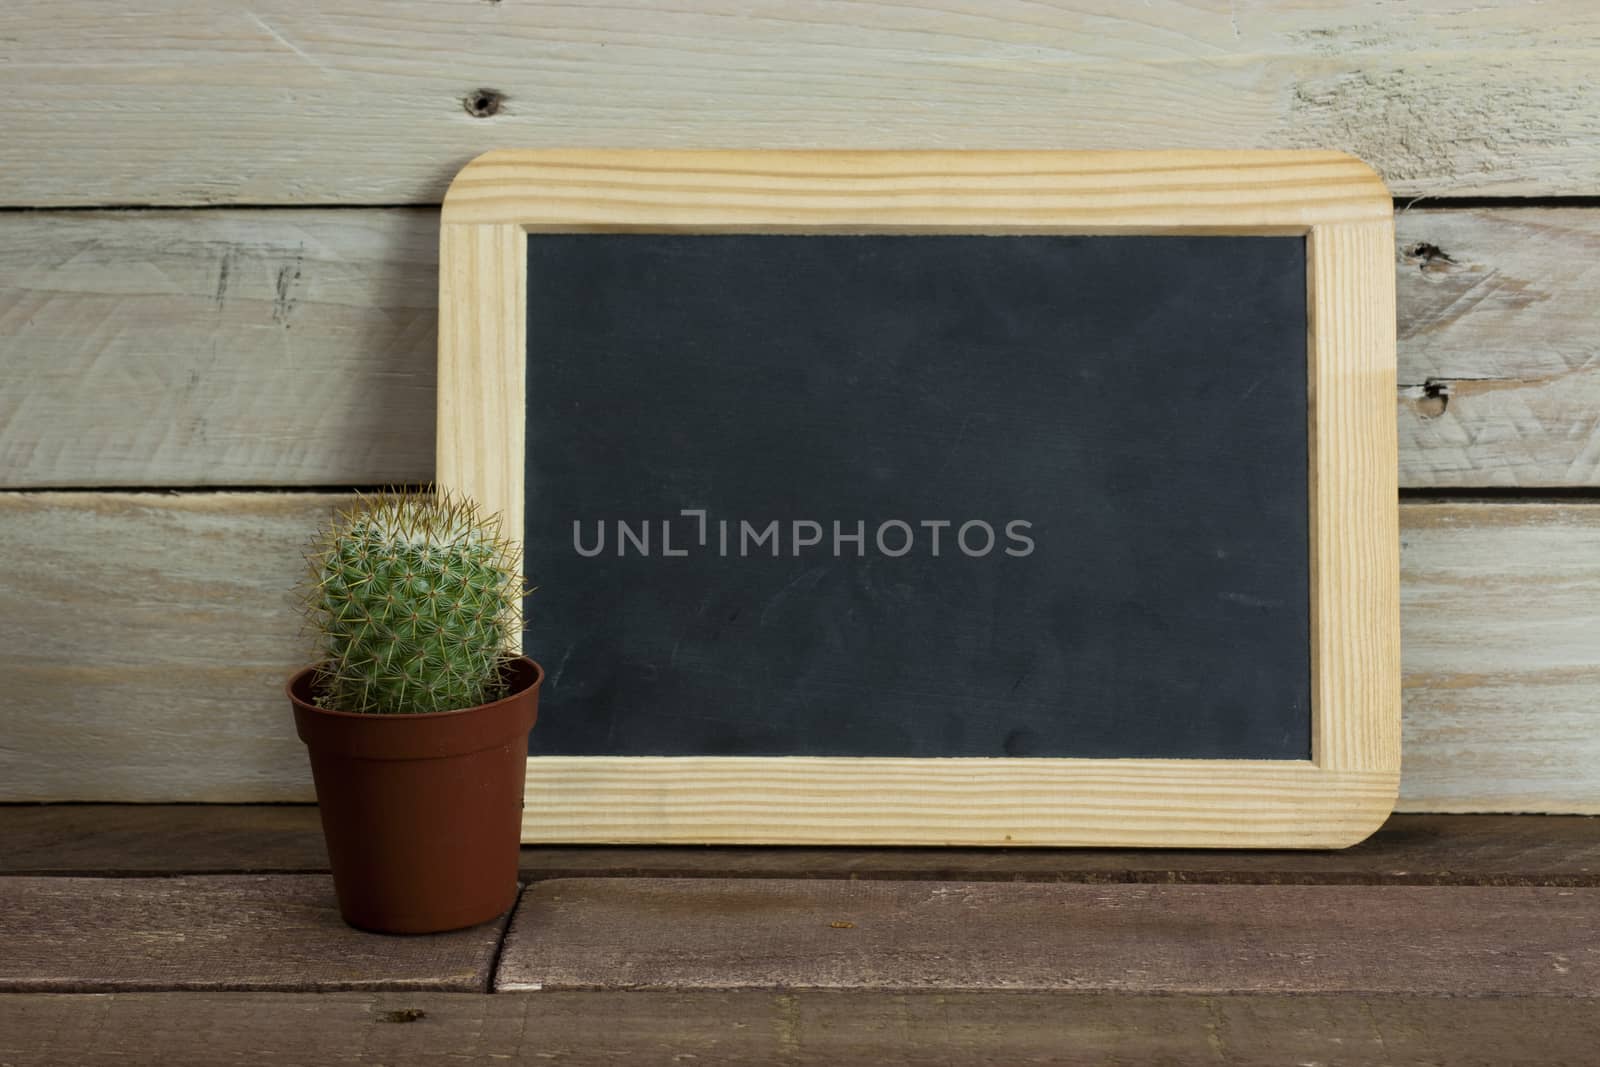 Cactus and blackboard set against a worn wooden background